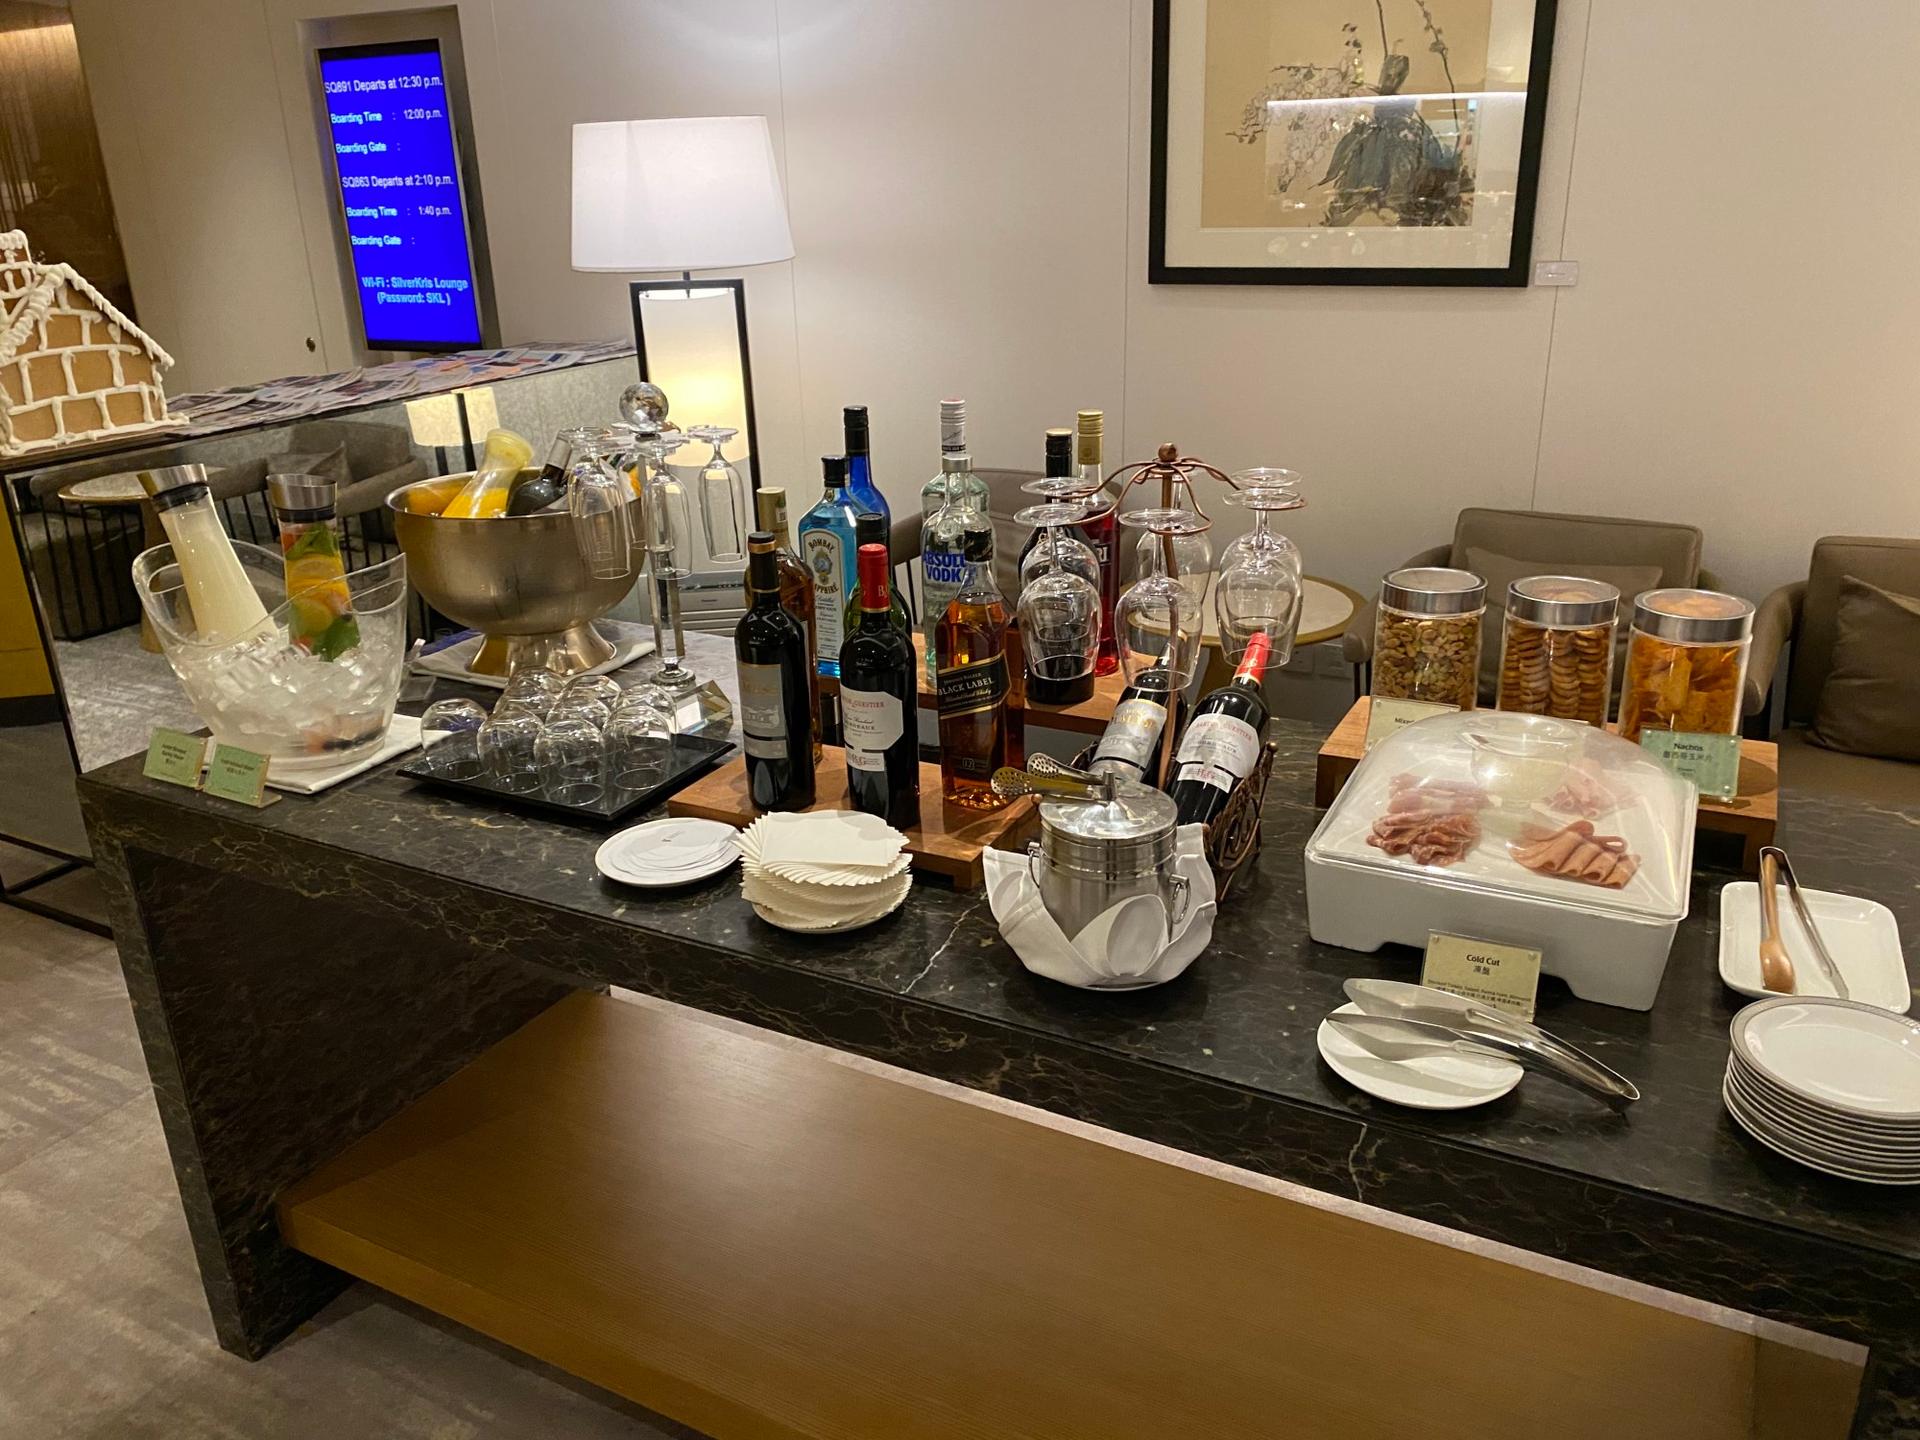 Singapore Airlines SilverKris Business Class Lounge image 61 of 68